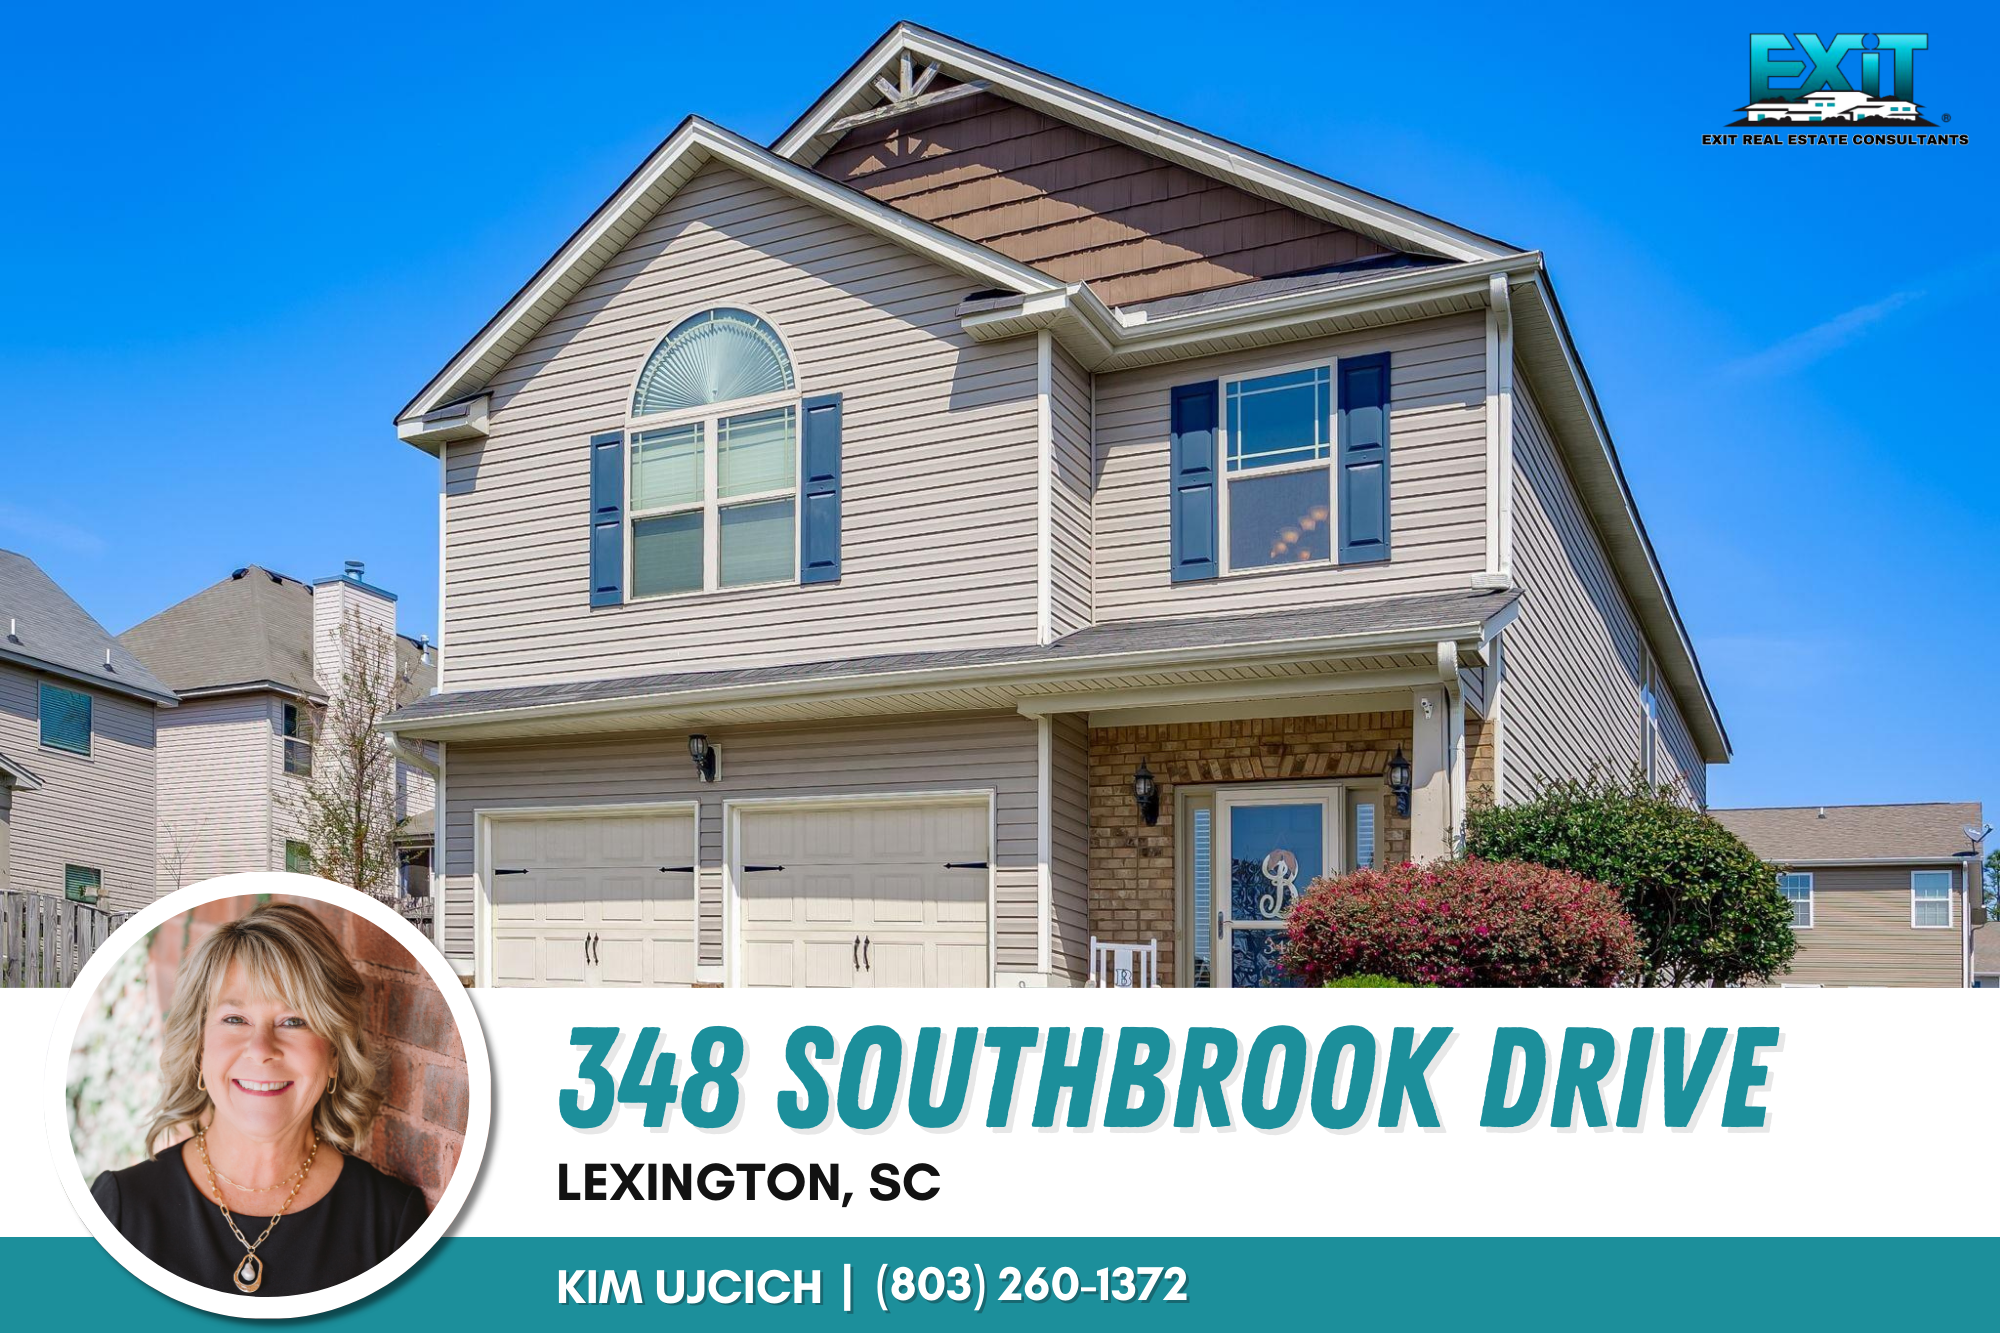 Just listed in South Brook - Lexington